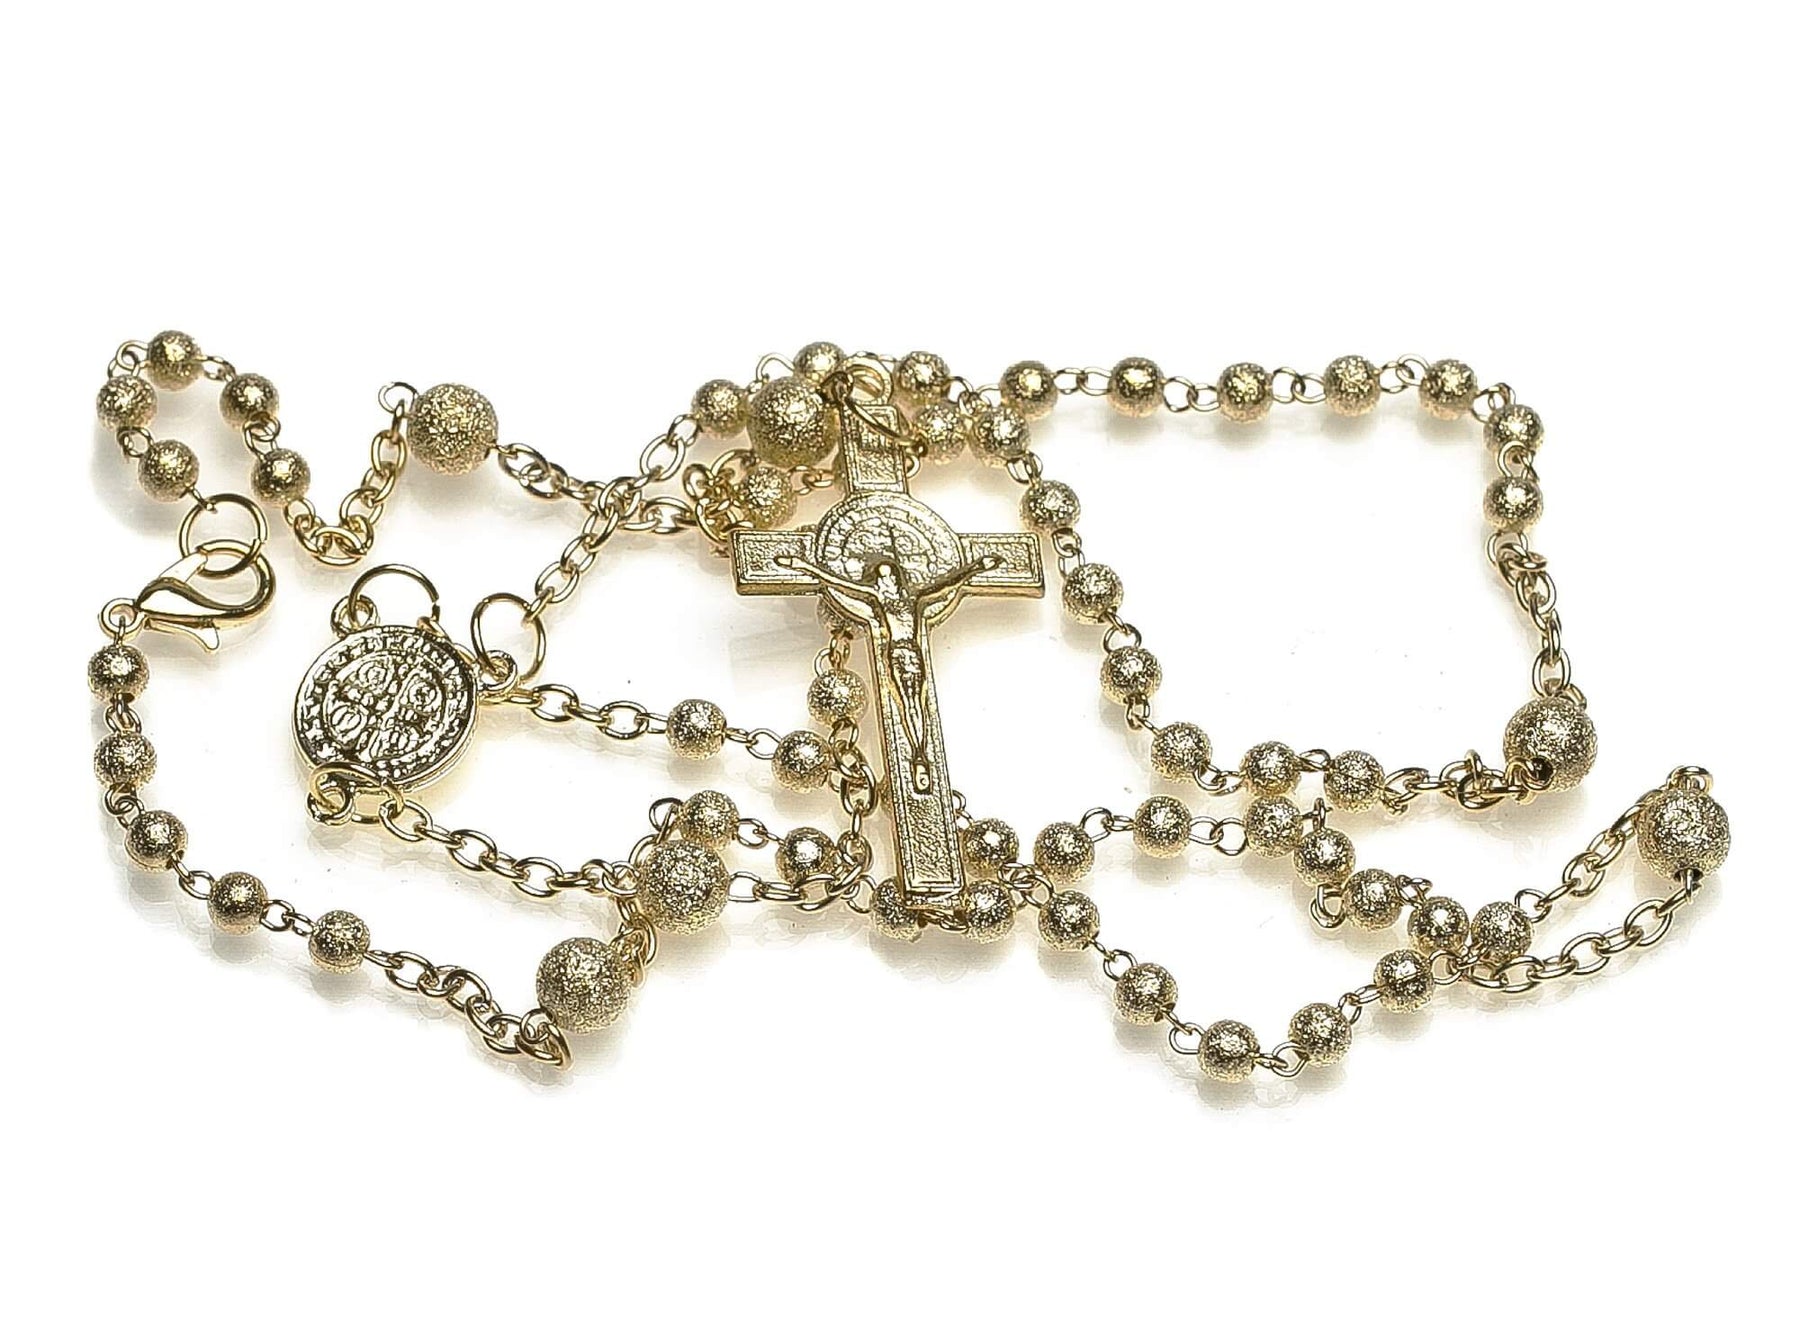 Handcrafted rosary in its standard fifteen Mysteries of the traditional Rosary. This item was designed based on the long-standing custom that was established by Pope Pius V in the 16th century.Handcrafted rosary in its standard fifteen Mysteries of the traditional Rosary. This item was designed based on the long-standing custom that was established by Pope Pius V in the 16th century.